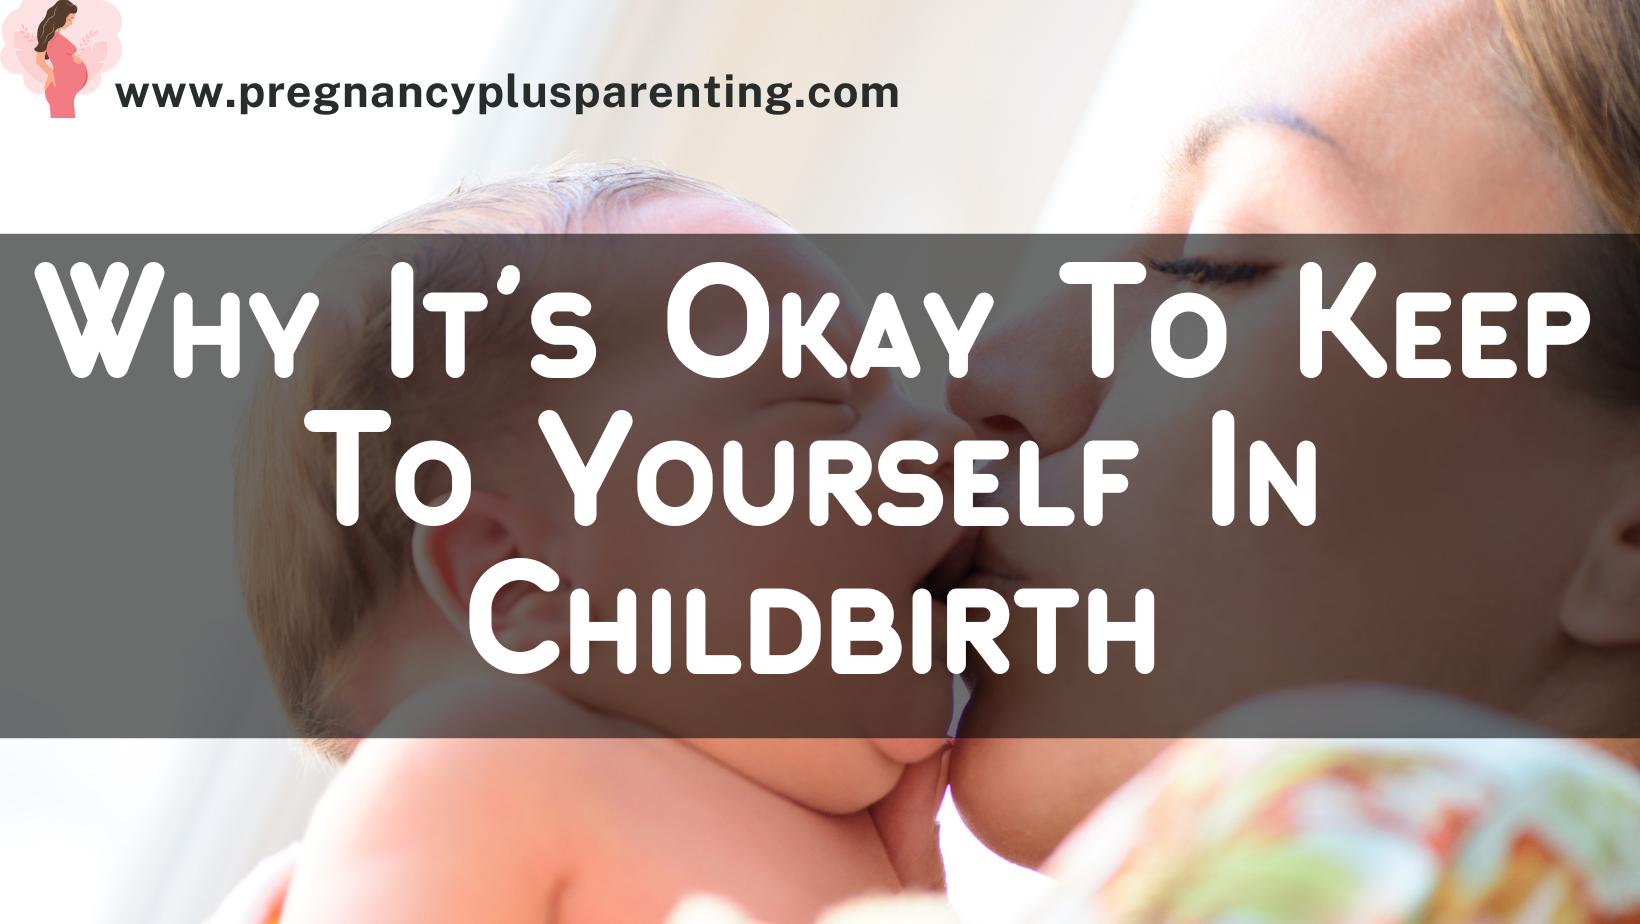 Why It's Okay To Keep To Yourself In Childbirth